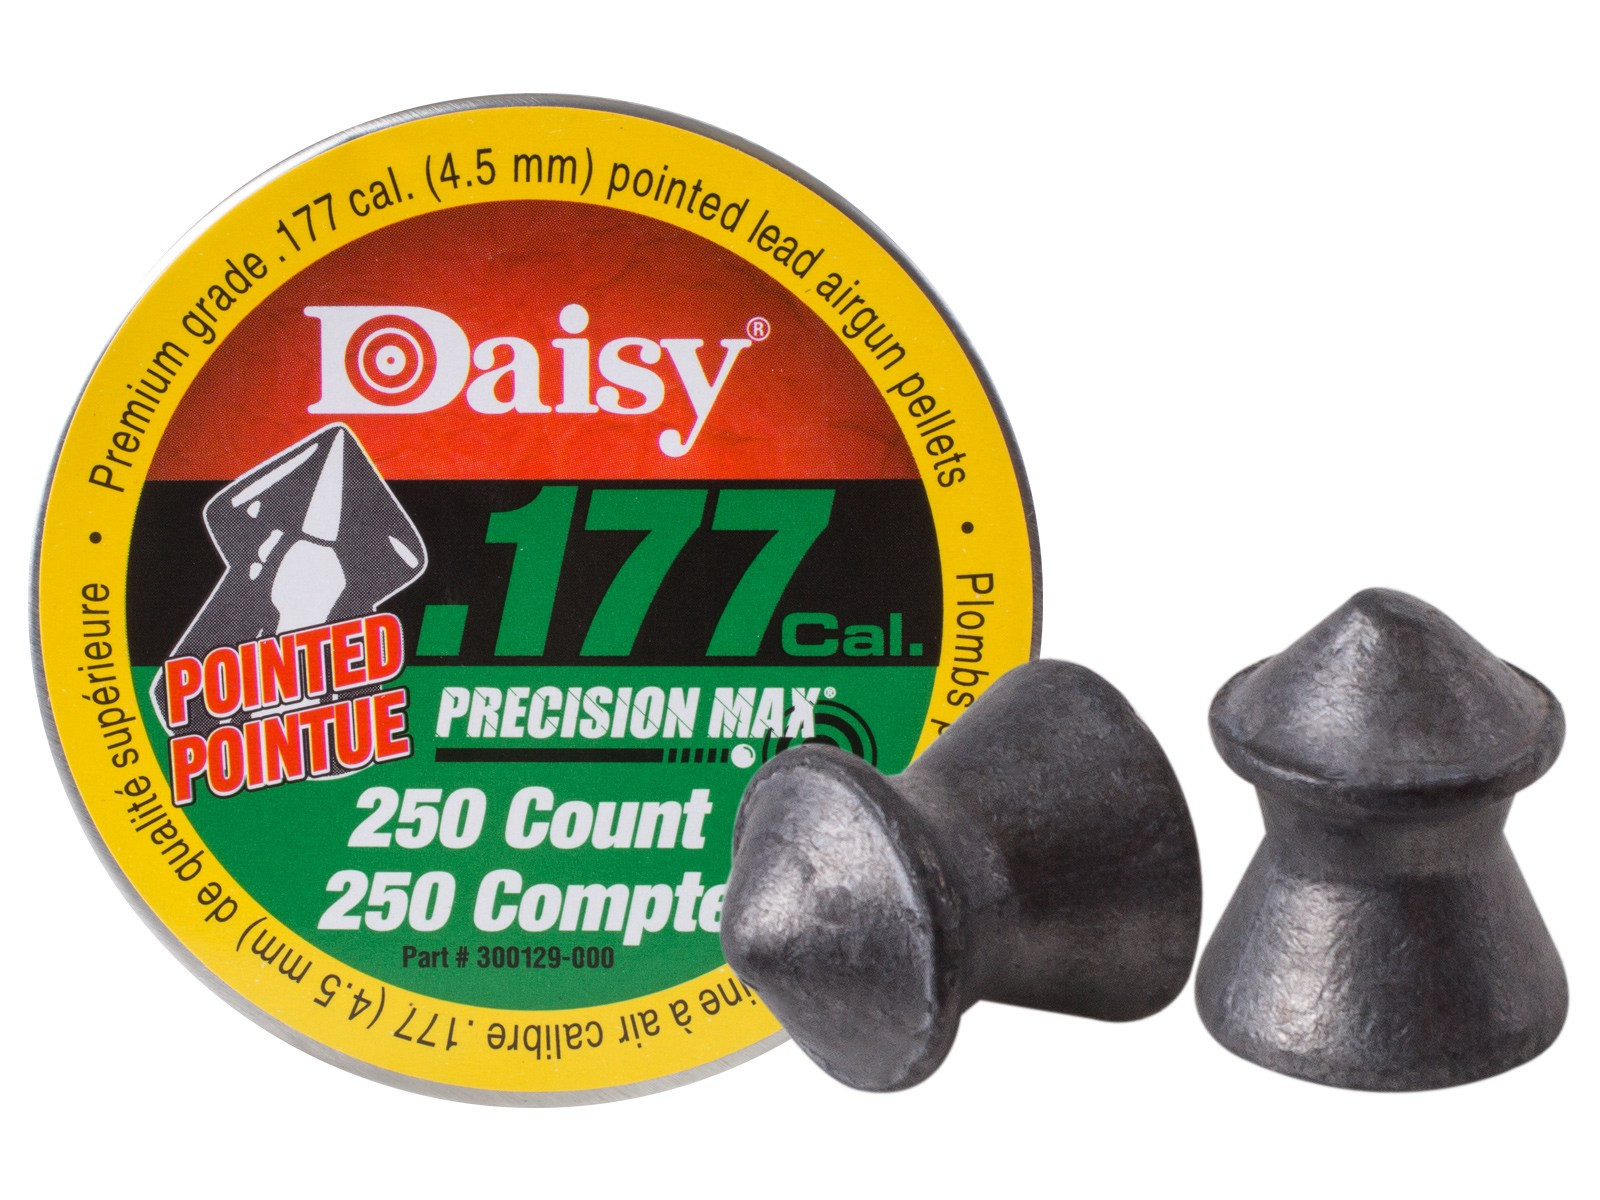 Daisy Precision Max Pointed .177 Cal, 7.2 gr - 250 ct